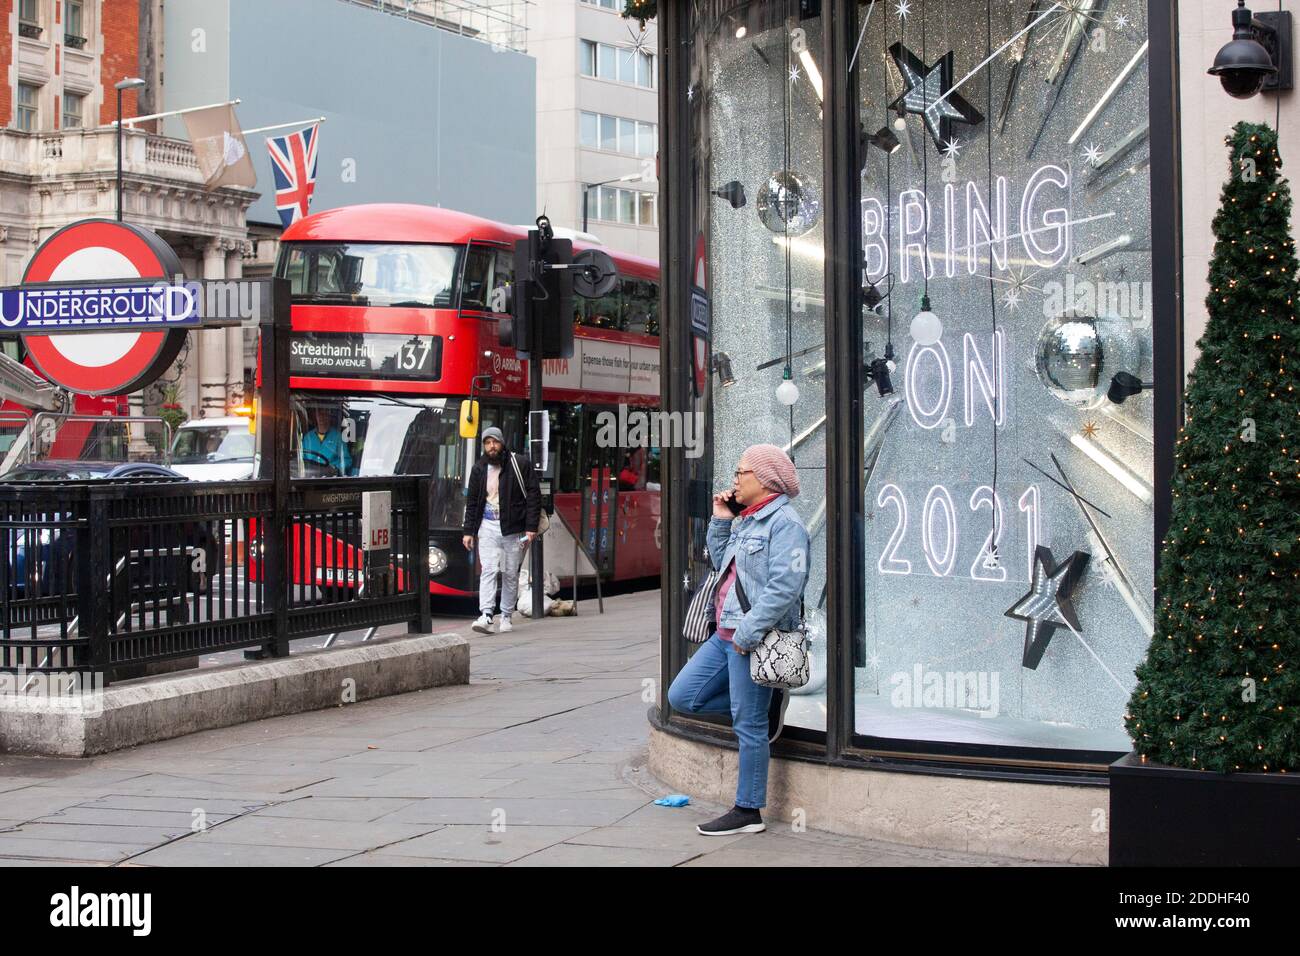 London, UK, 25 November 2020: Shops in London are shut and Harvey Nichols has neon window displays saying BAH HUMBUG and BRING ON 2021. London Mayor Sadiq Khan has said he wants London to be in Tier 2 of the post-lockdown restrictions.  Anna Watson/Alamy Live News Stock Photo